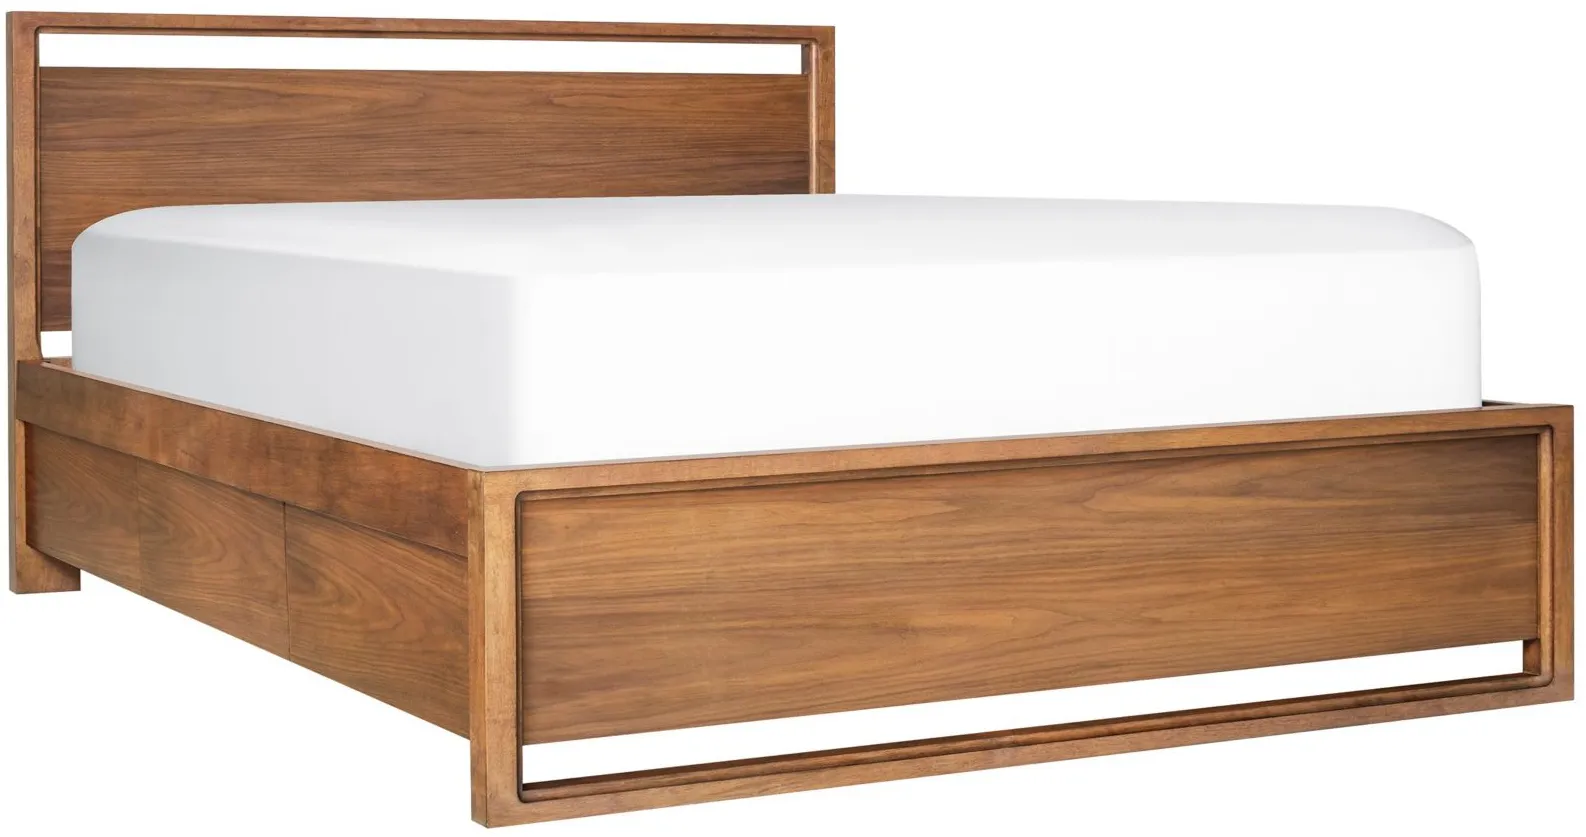 Aversa 2-sided Storage Bed in Light Cherry by Bellanest